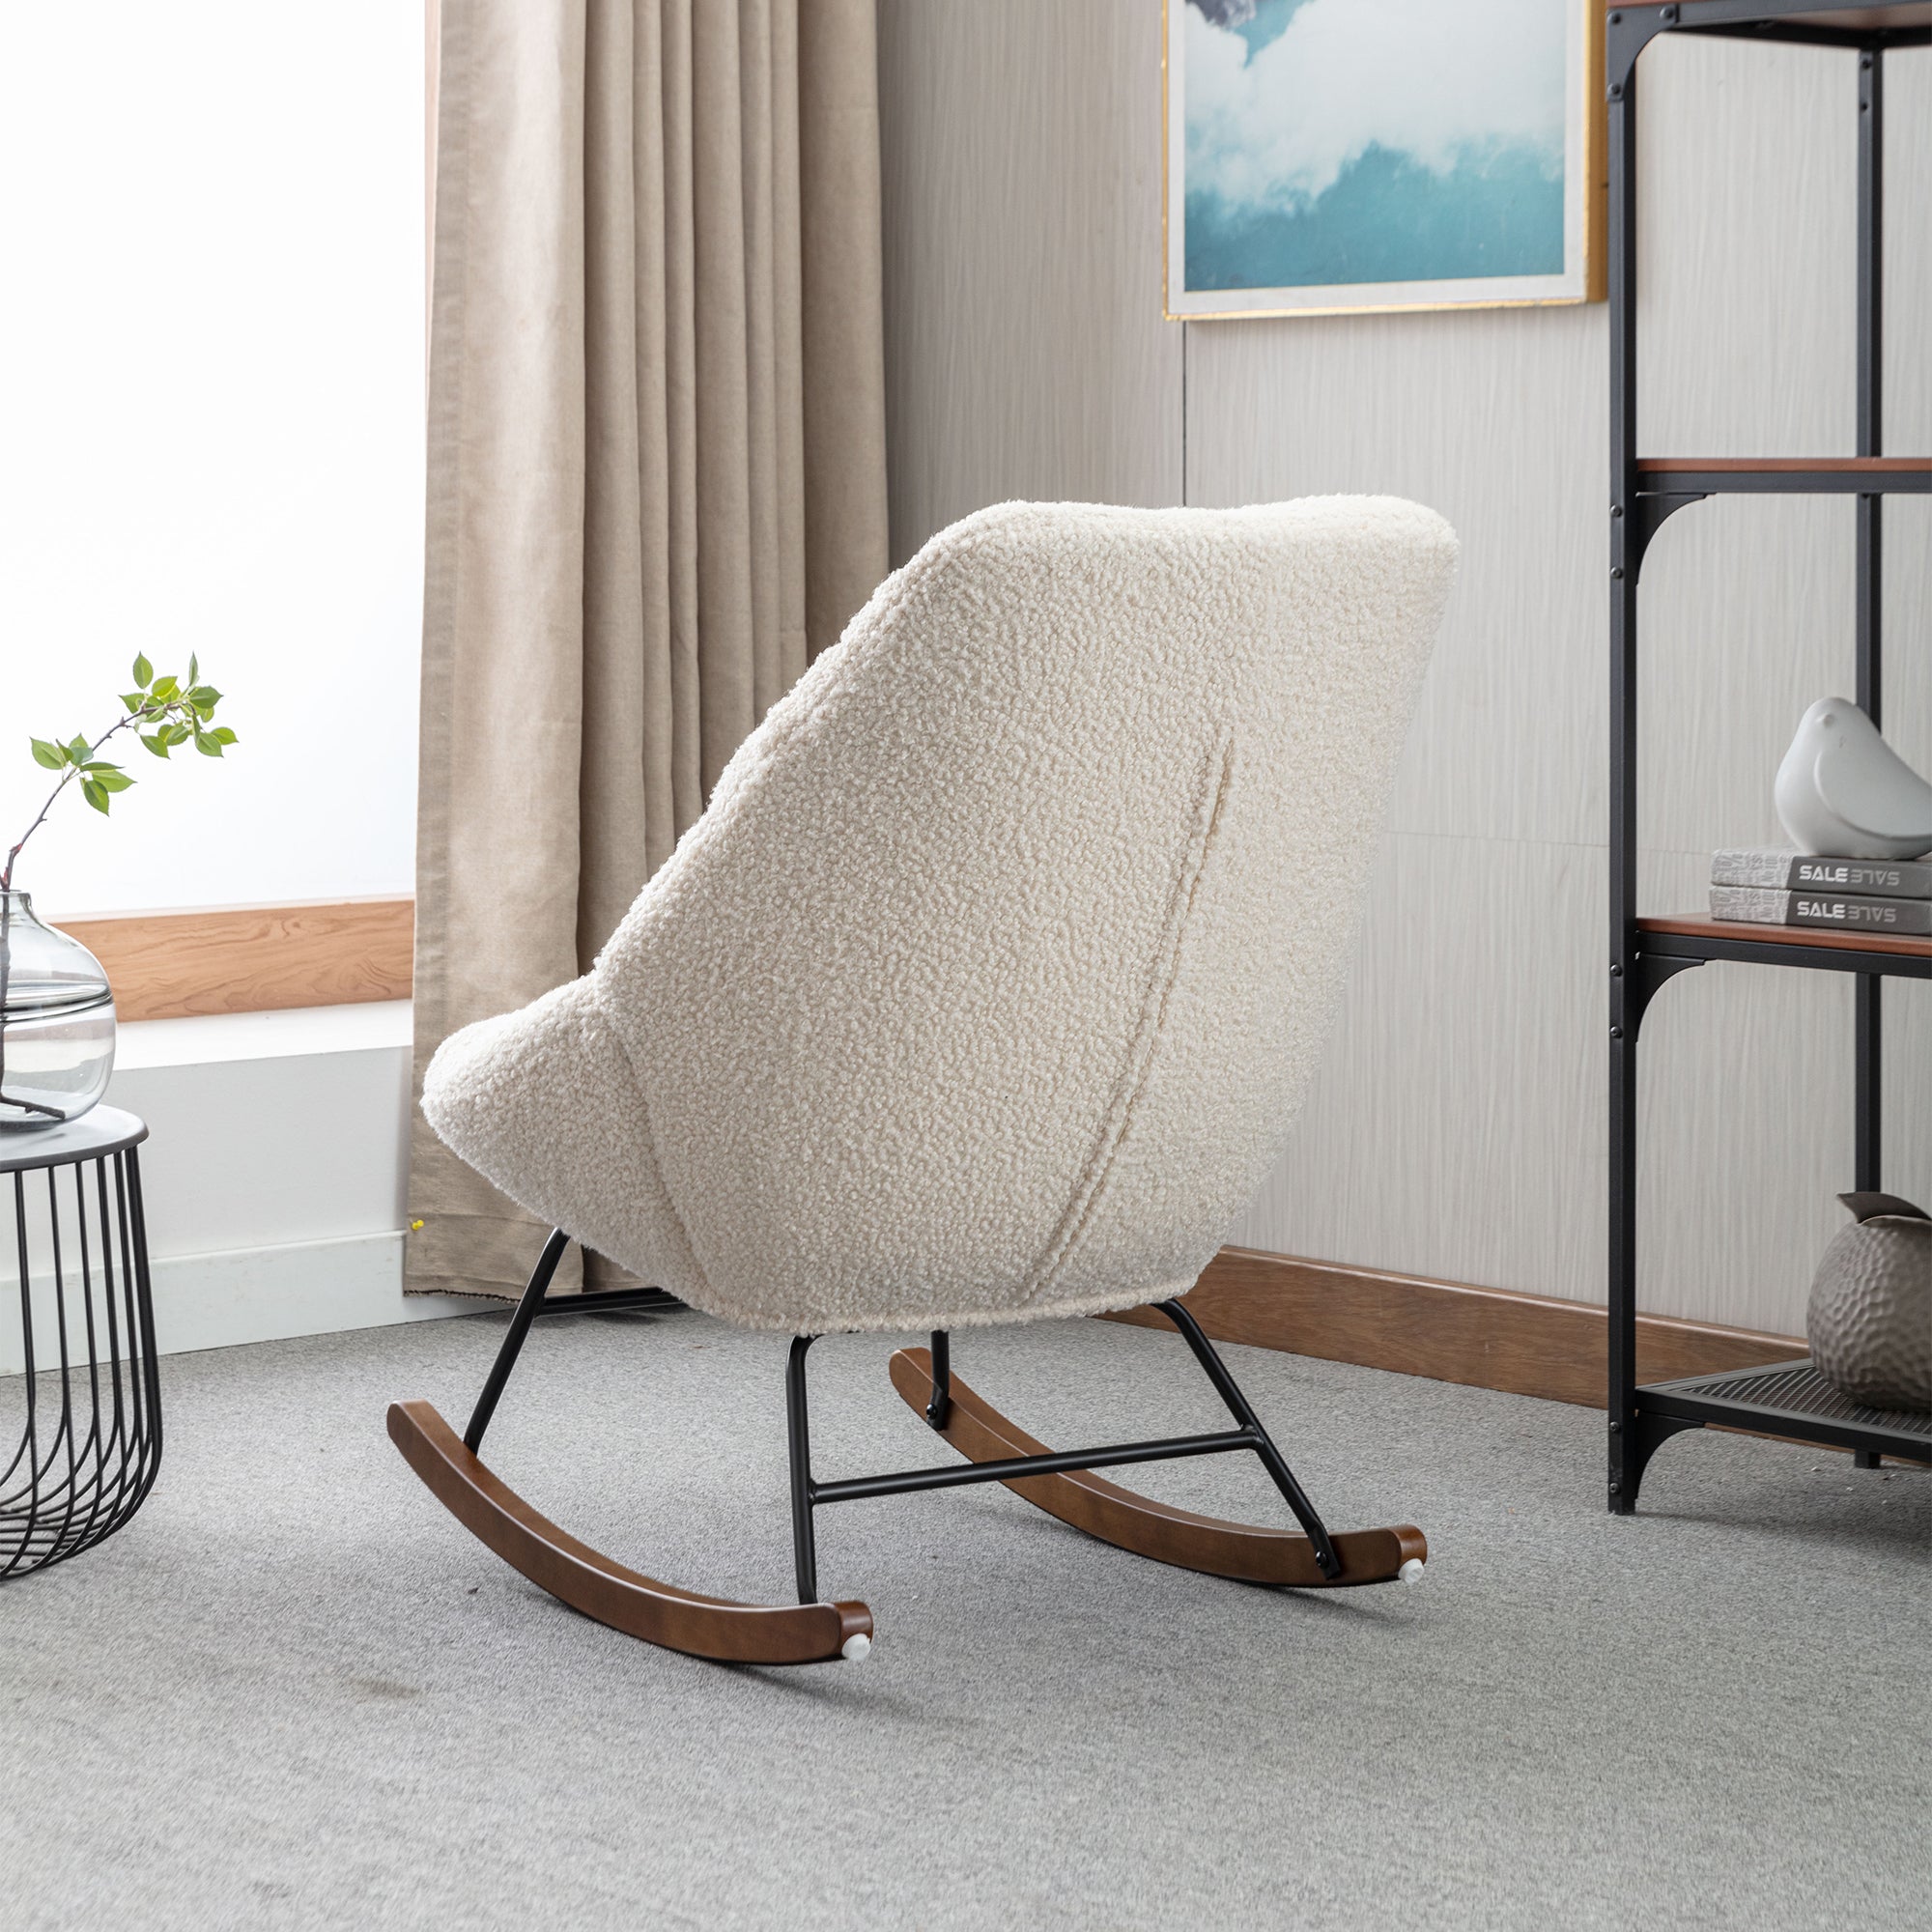 Tufted Rocking Chair